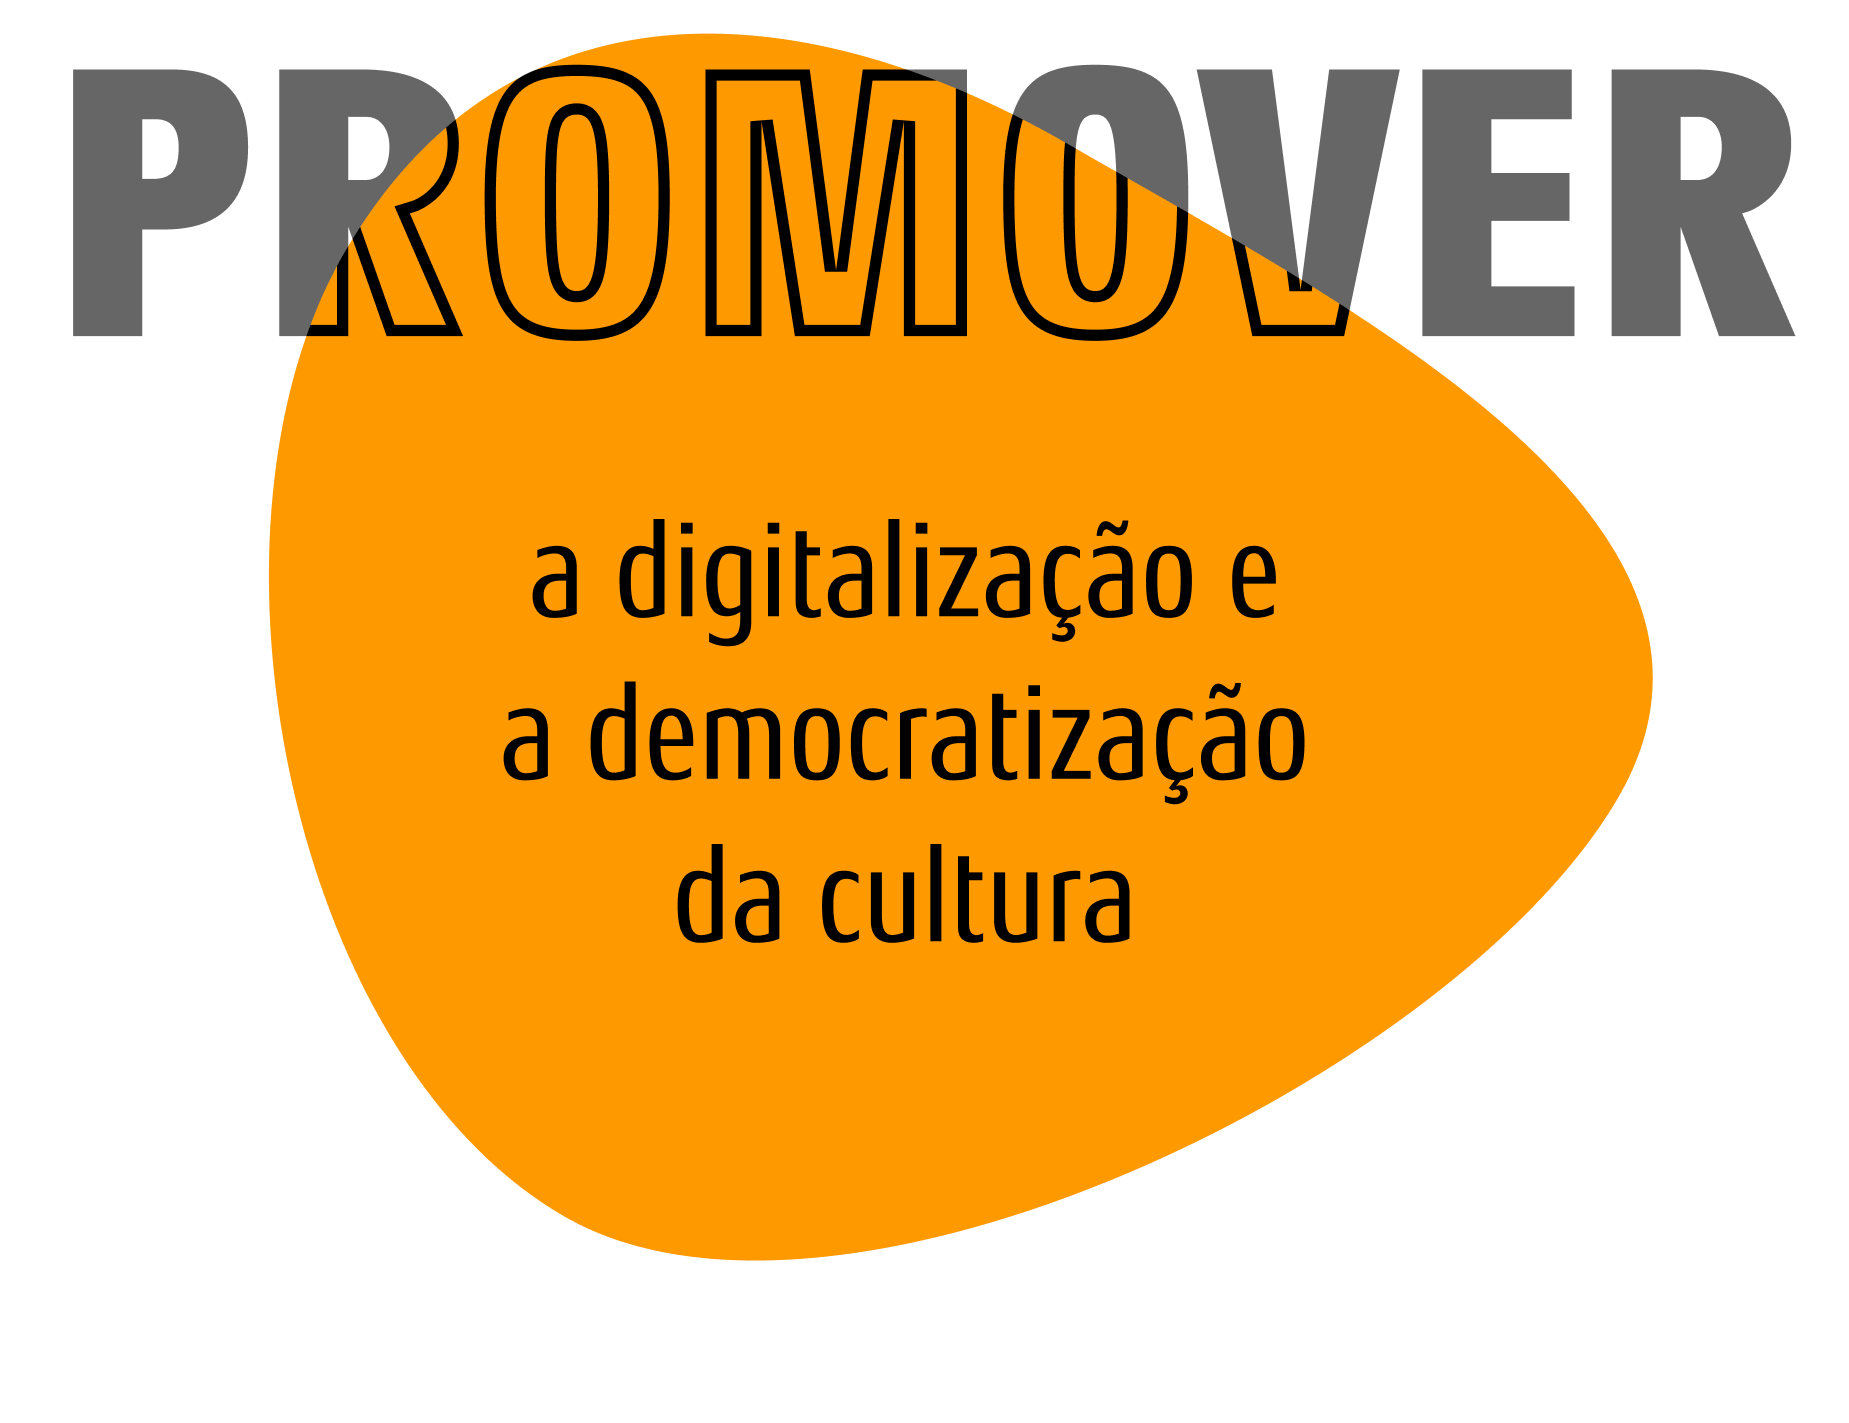 promover